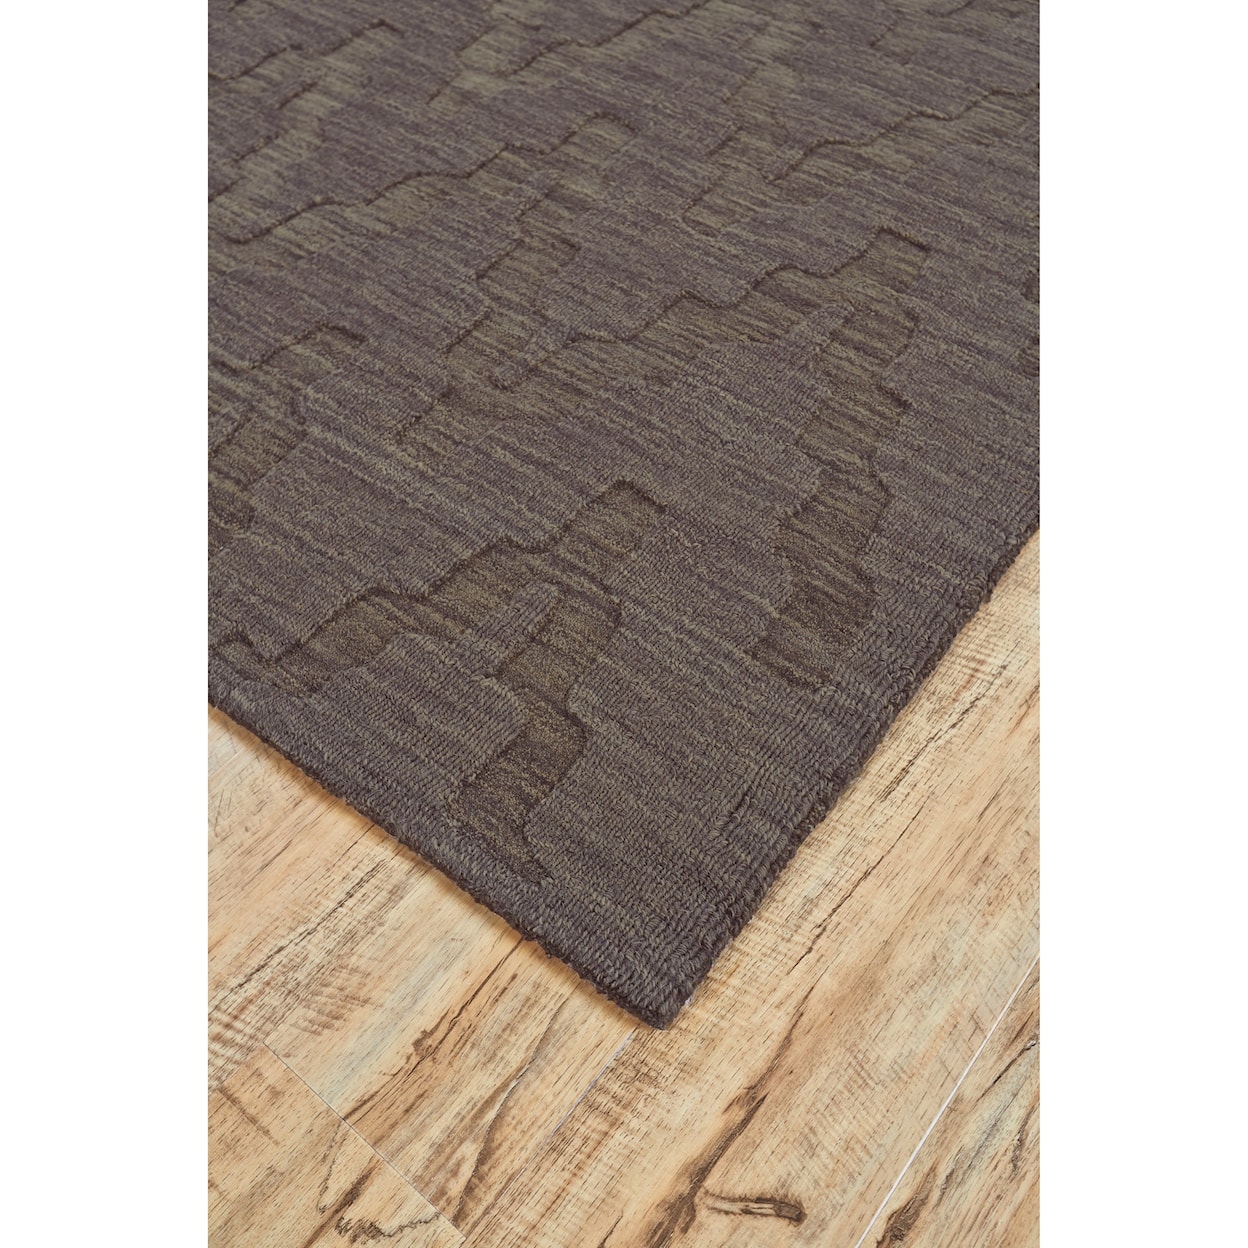 Feizy Rugs Soma Charcoal 5' x 8' Area Rug